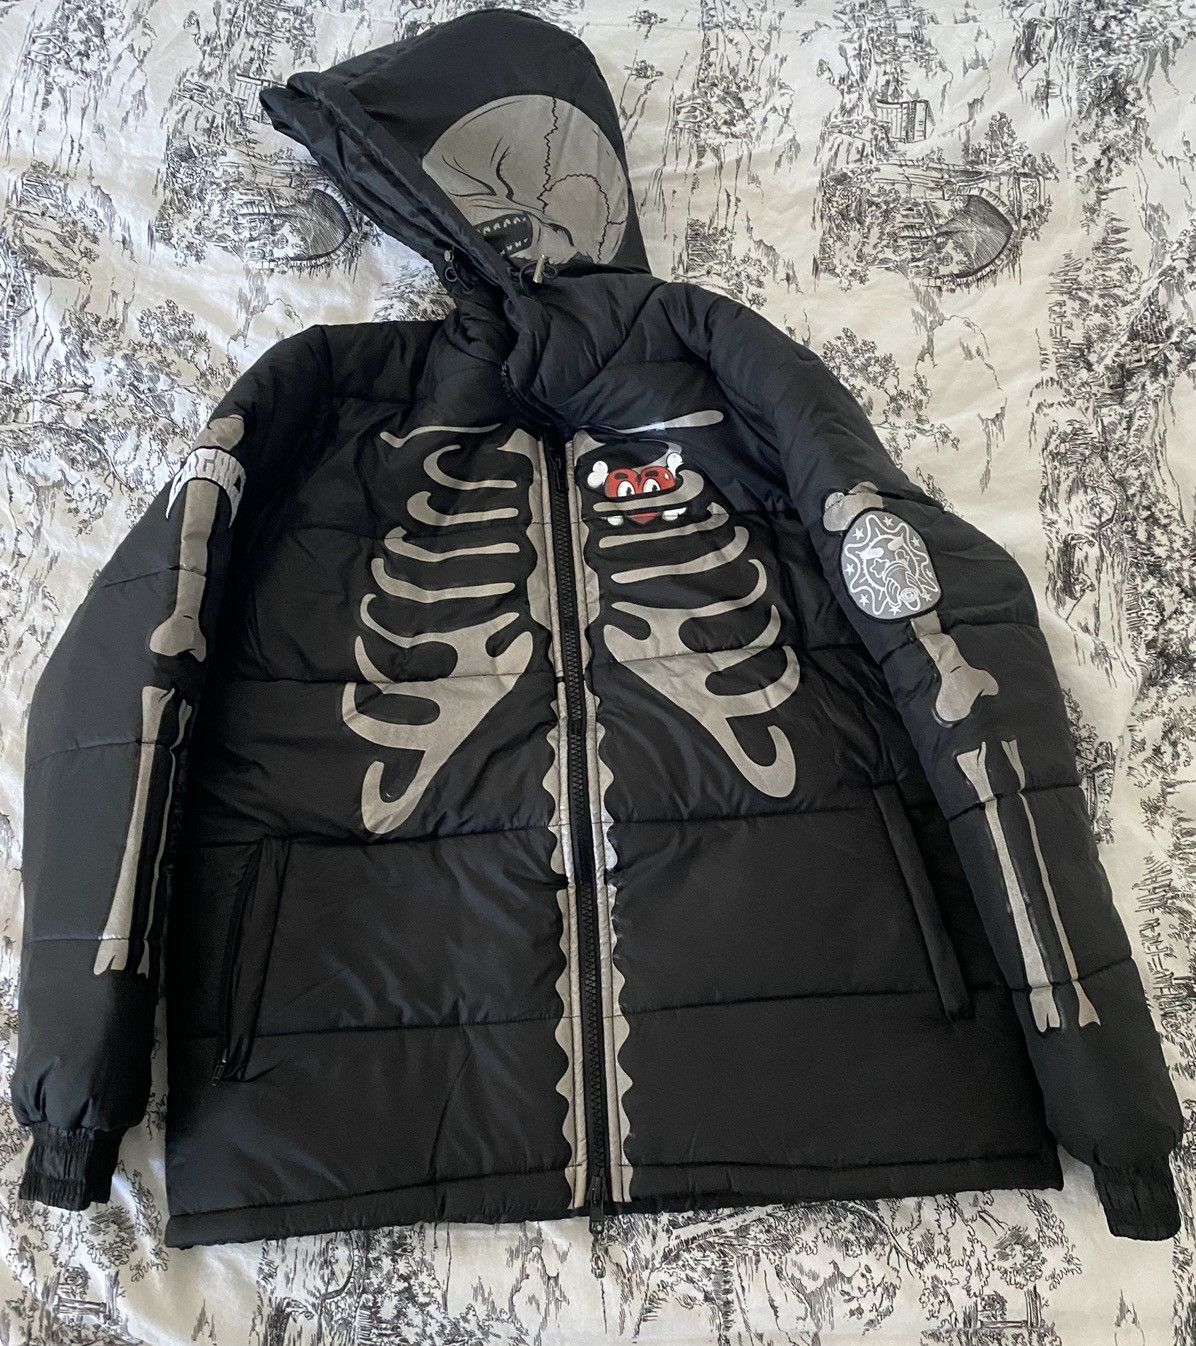 Glo Gang GLO GANG puffer jacket in size M | Grailed